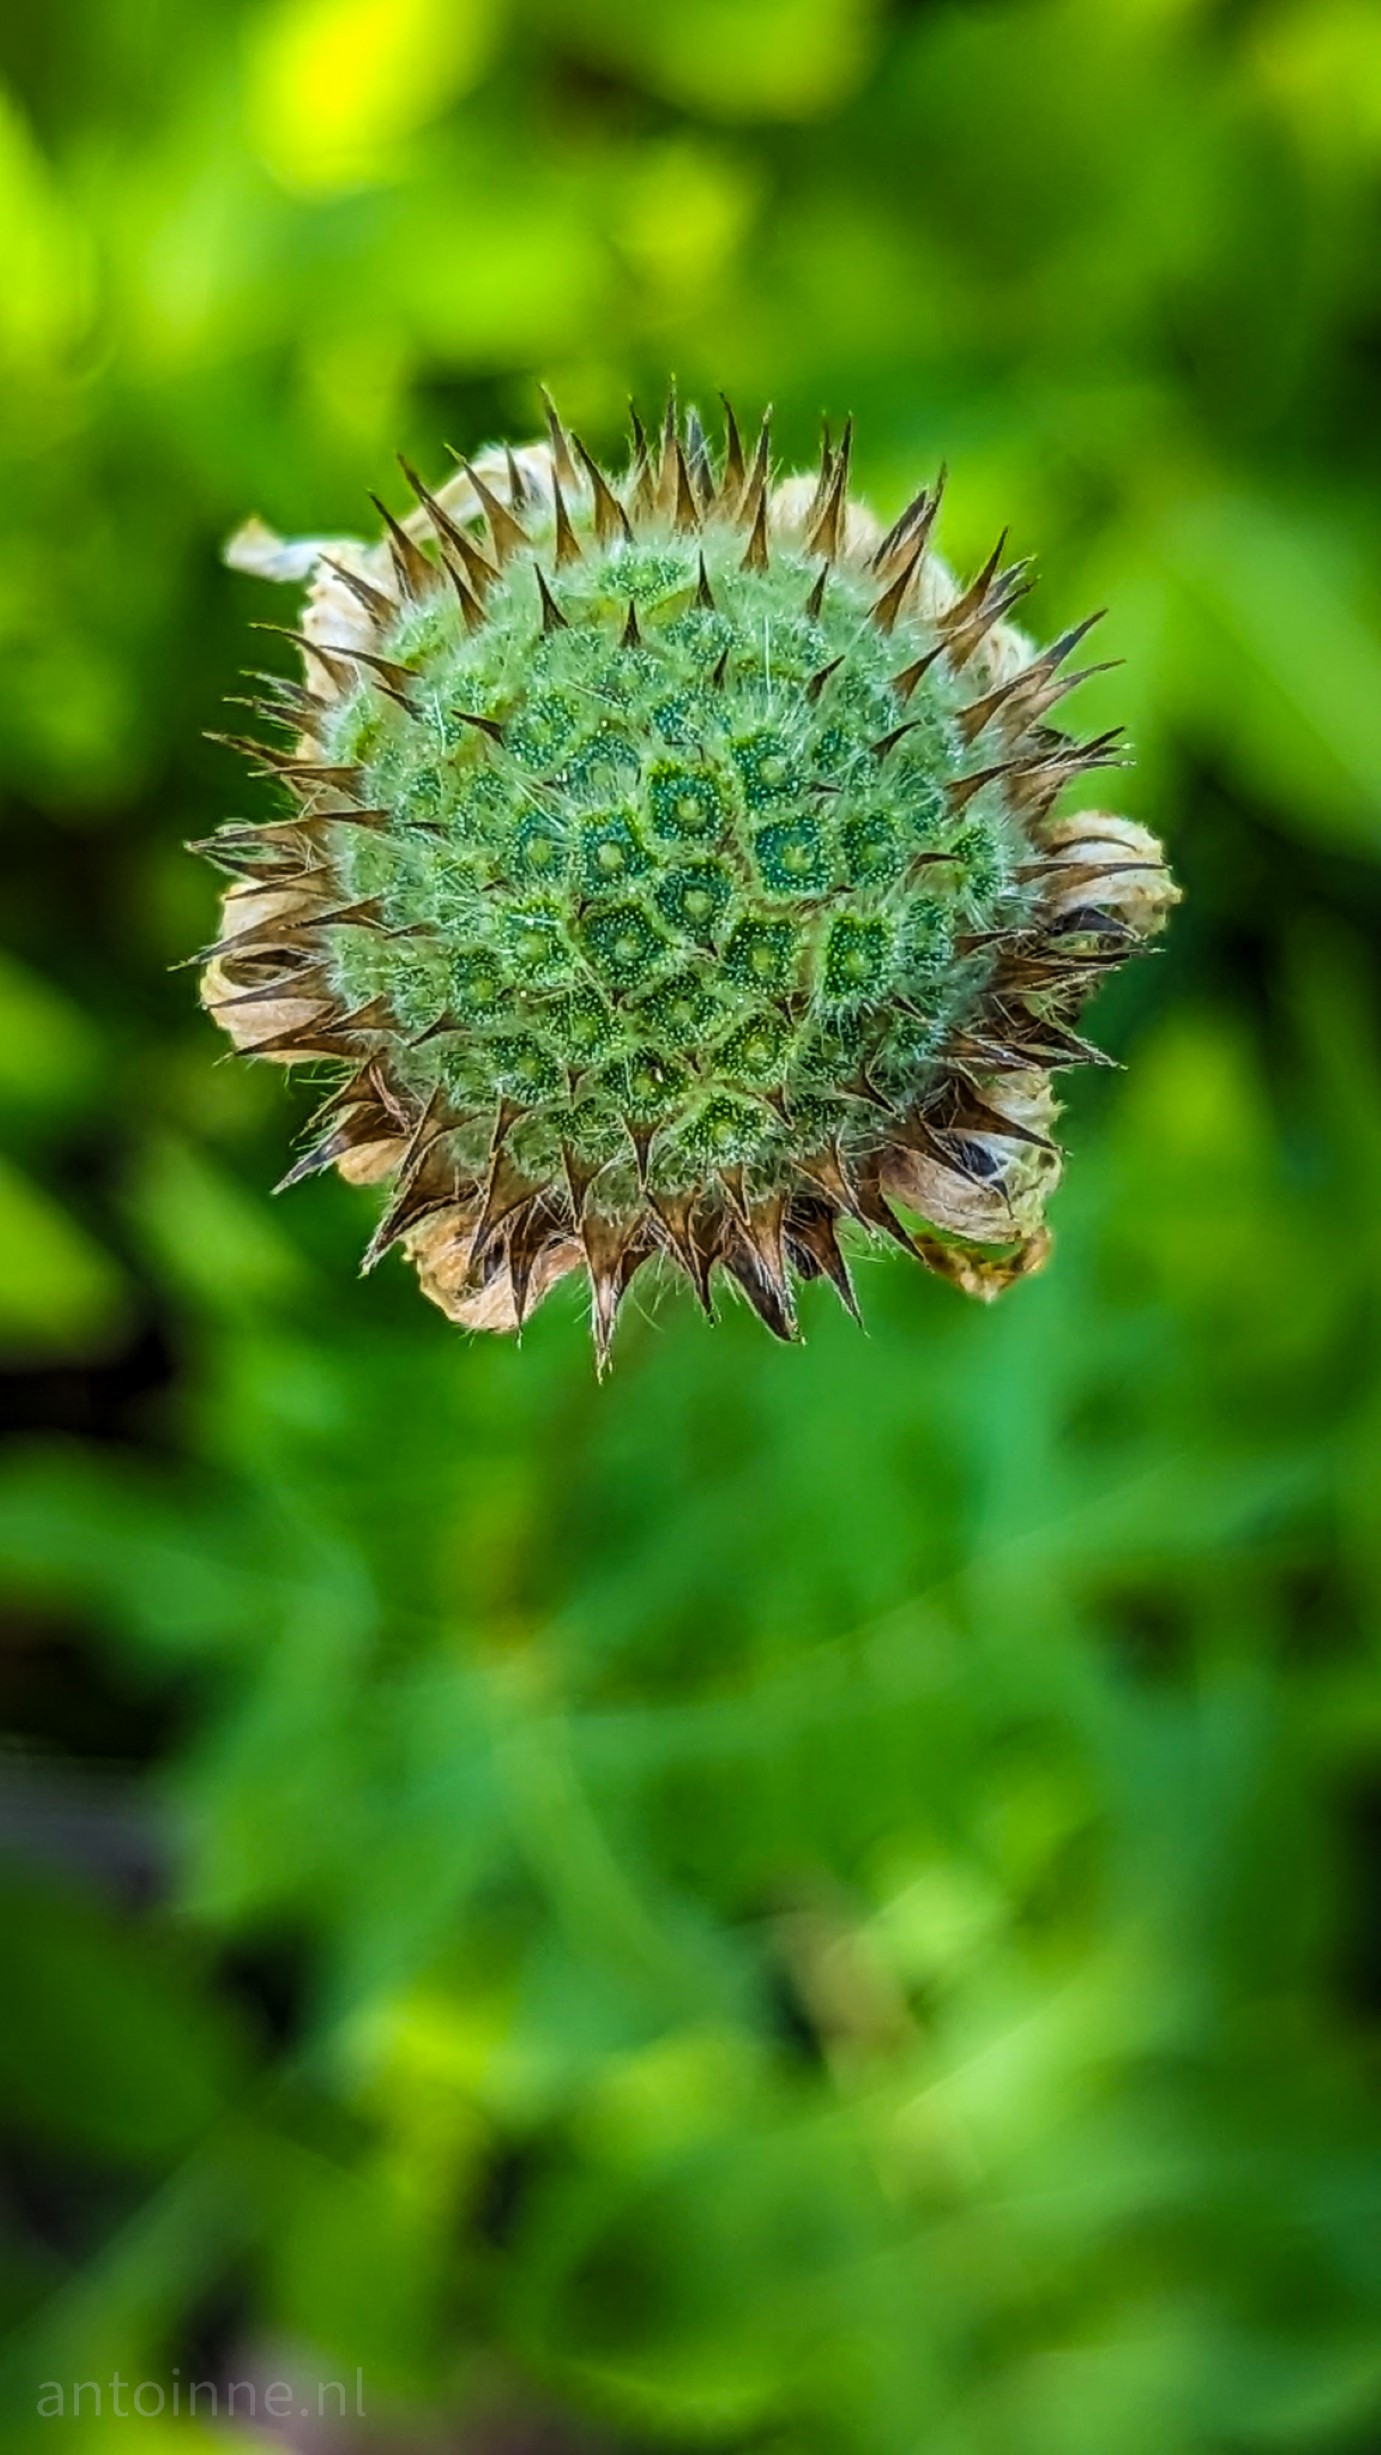 Spiny Flower Pod. A green seed pod with spines above a green background.